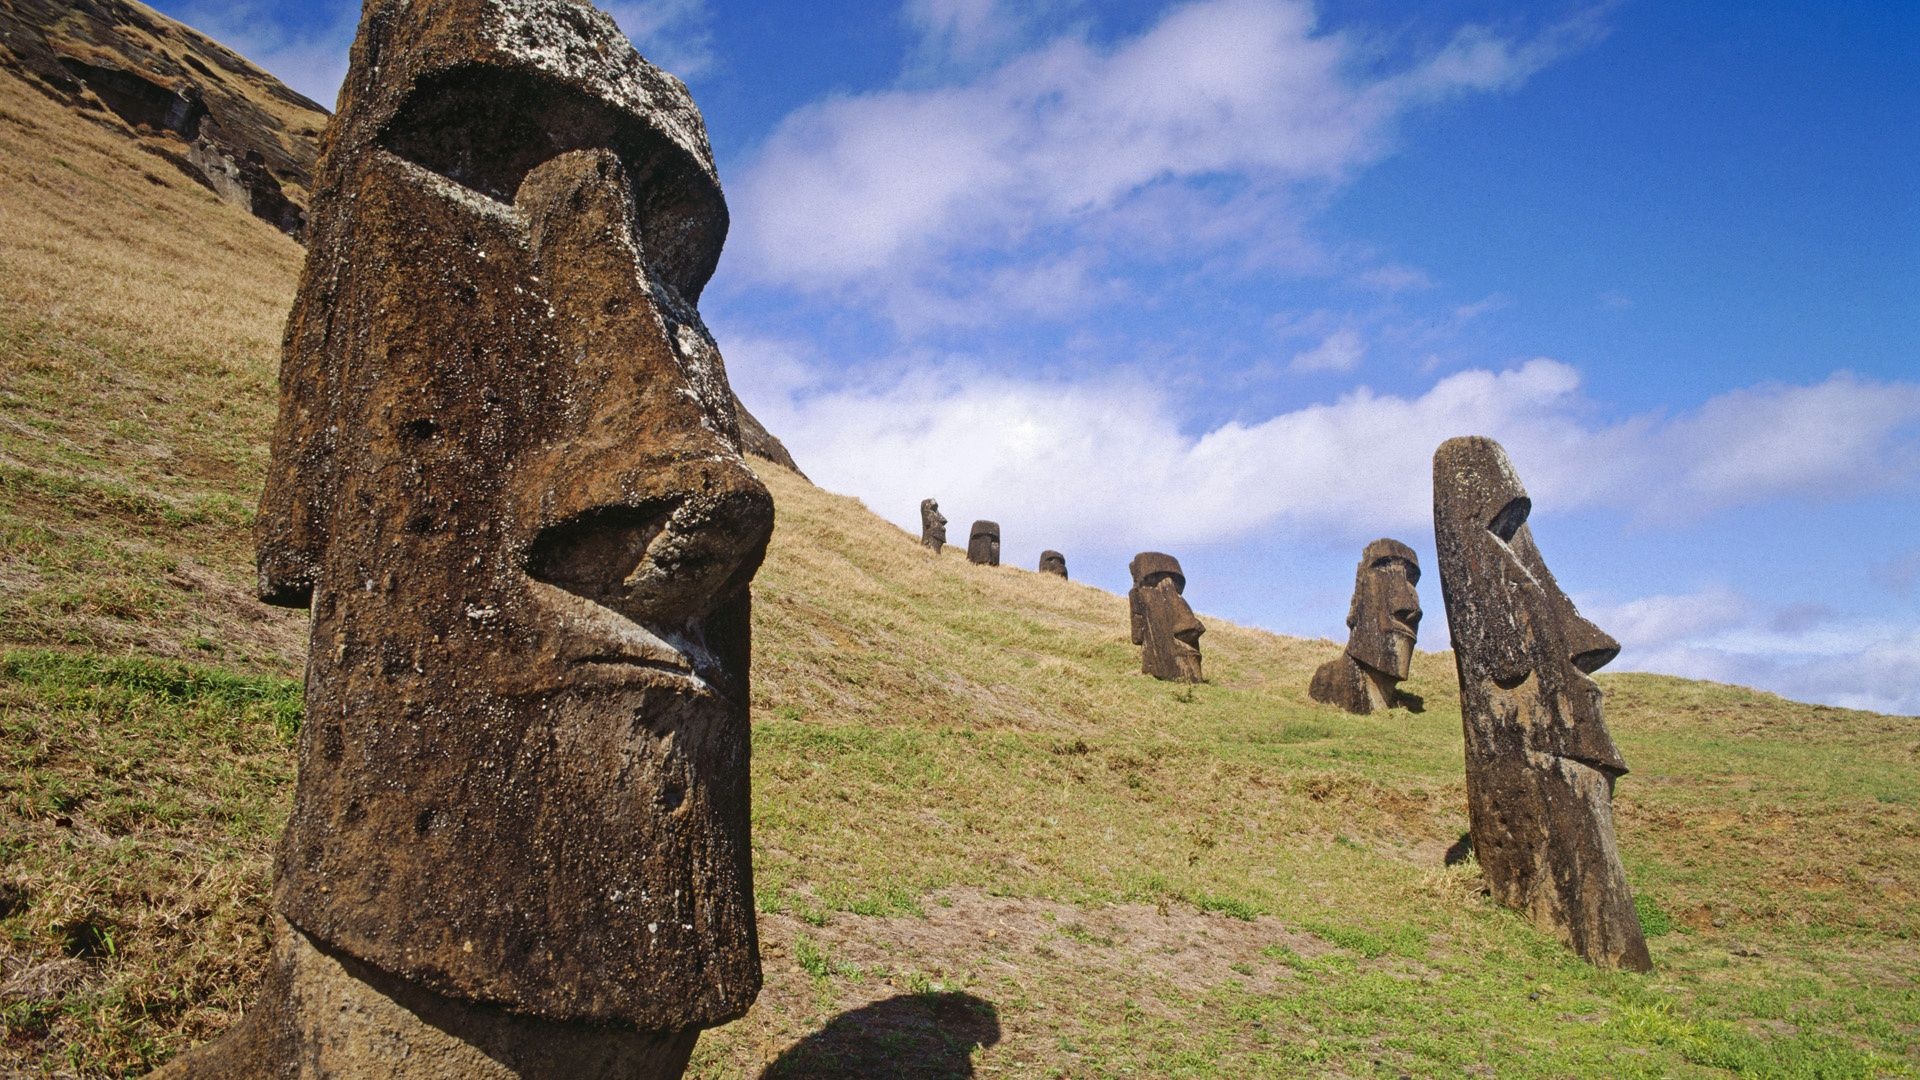 Iconic stone figures, Enigmatic Easter Island, Majestic sculptures, Cultural heritage, 1920x1080 Full HD Desktop